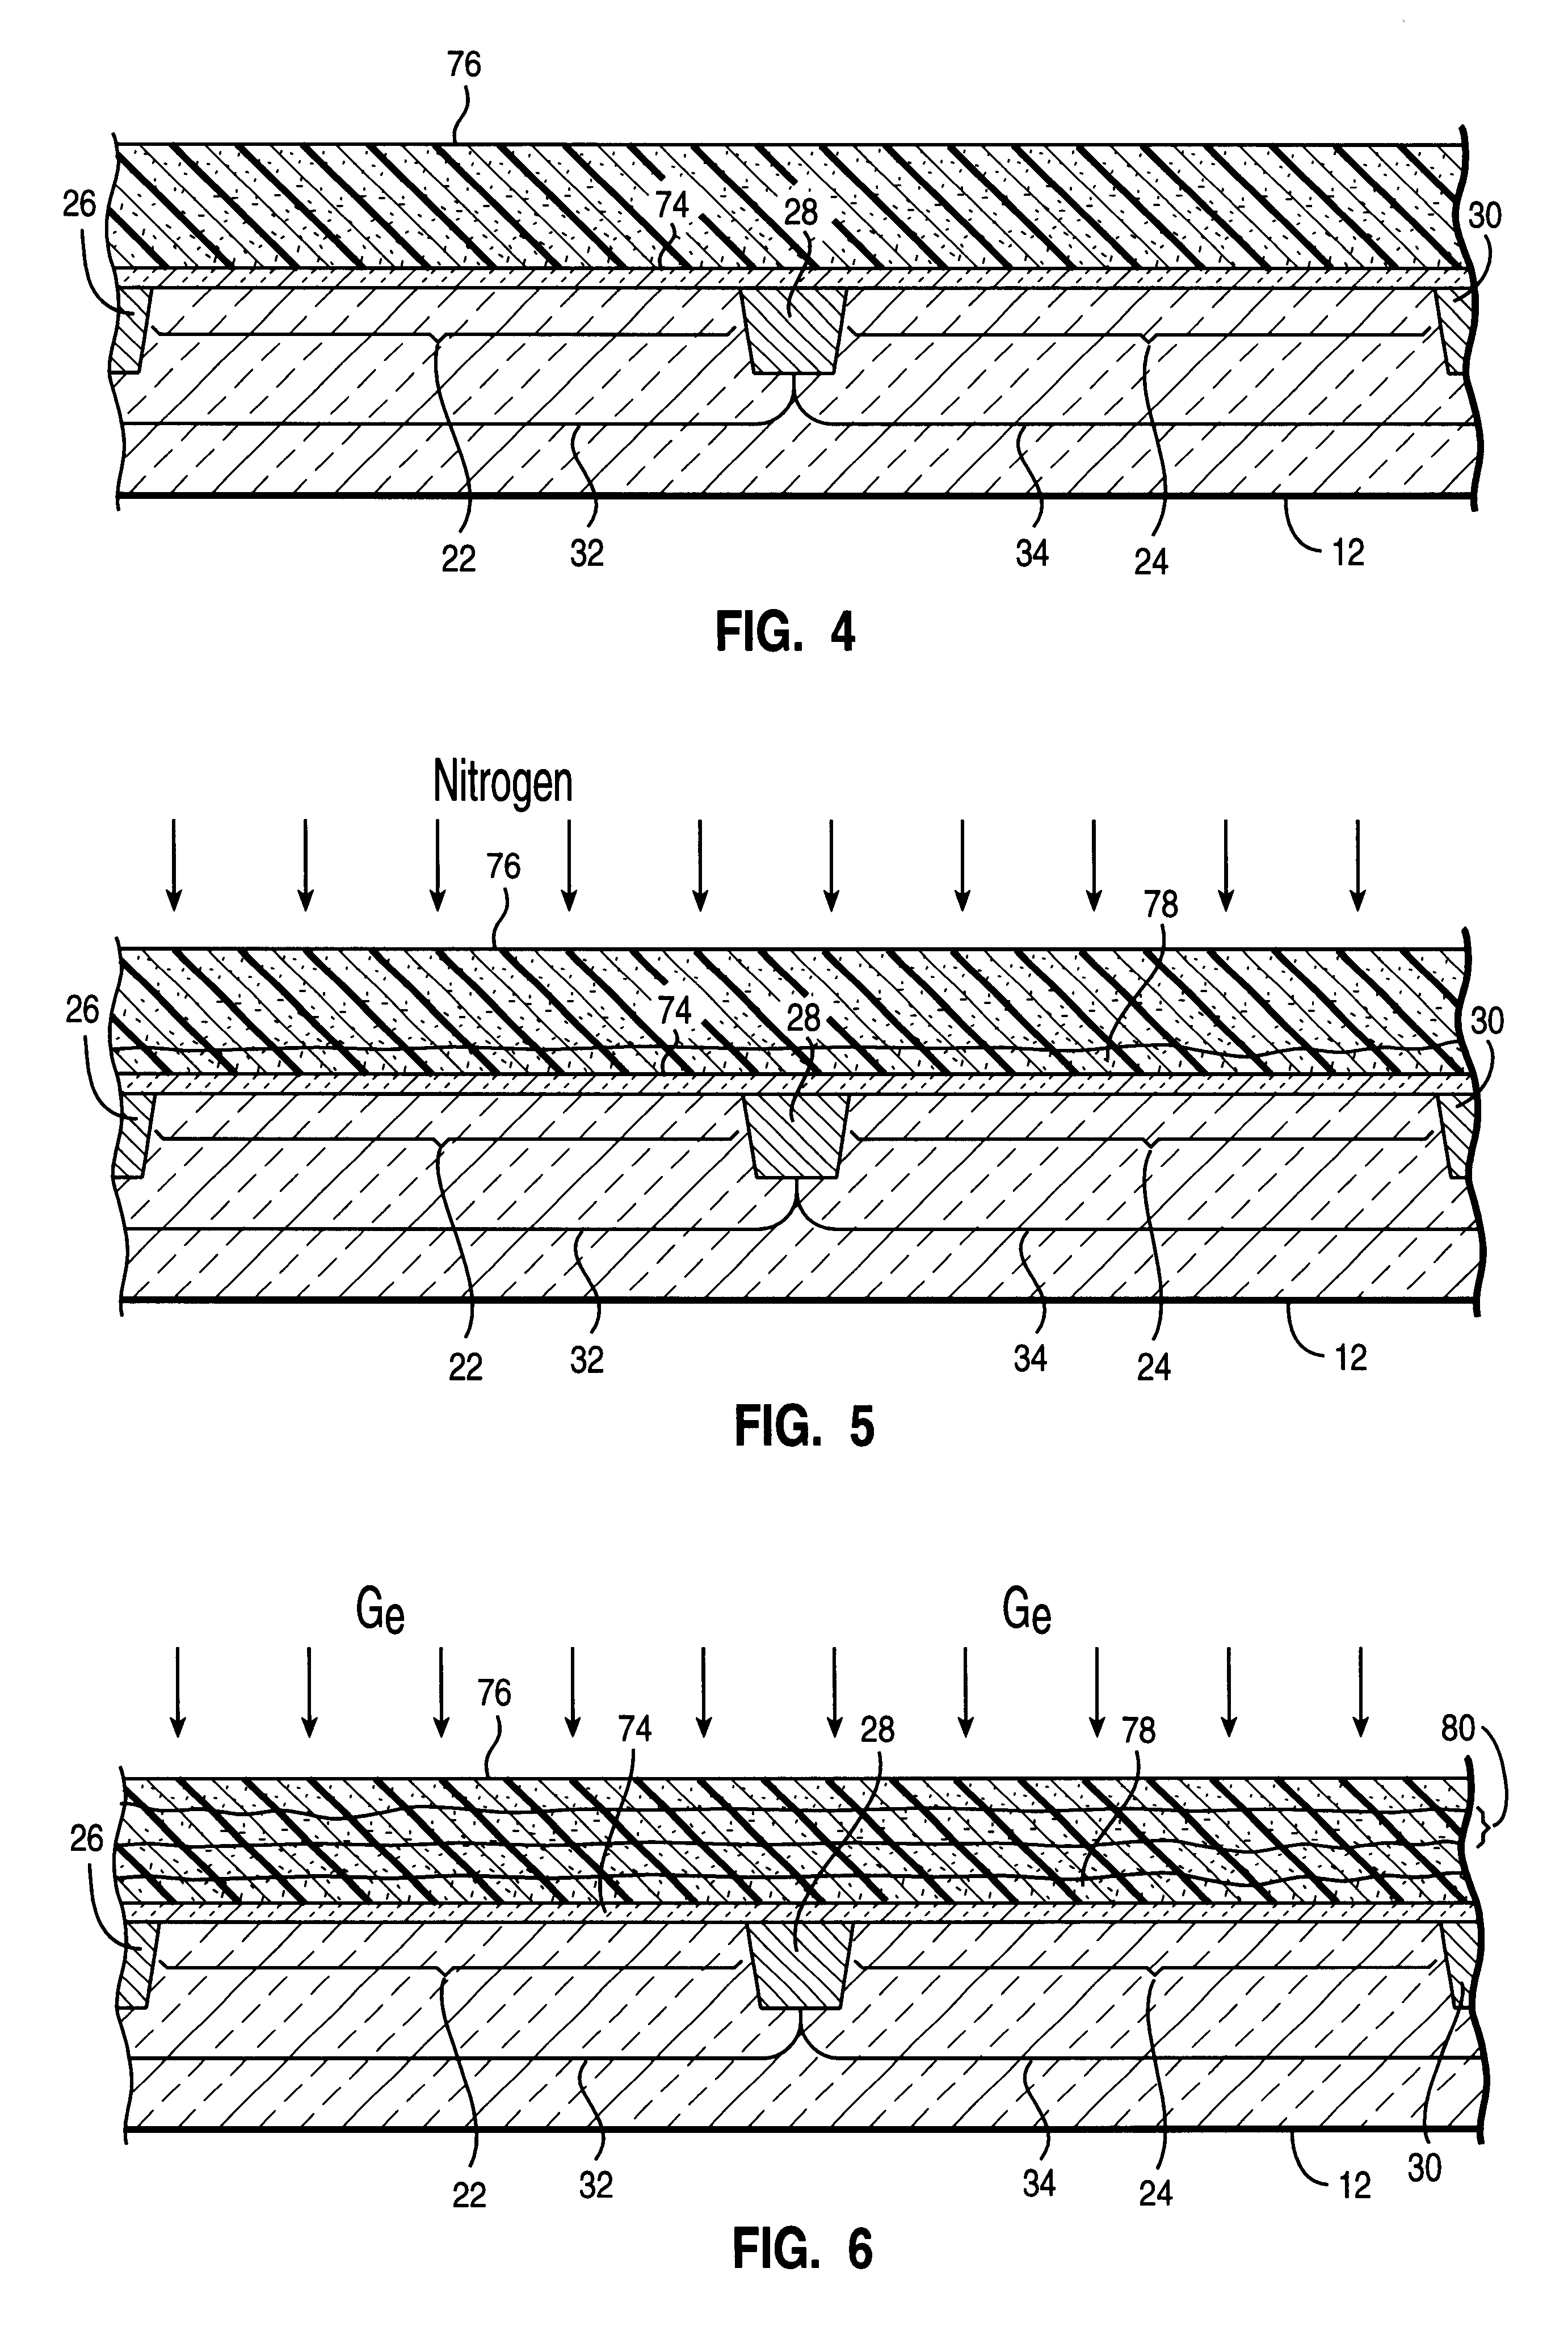 CMOS transistor design for shared N+/P+ electrode with enhanced device performance